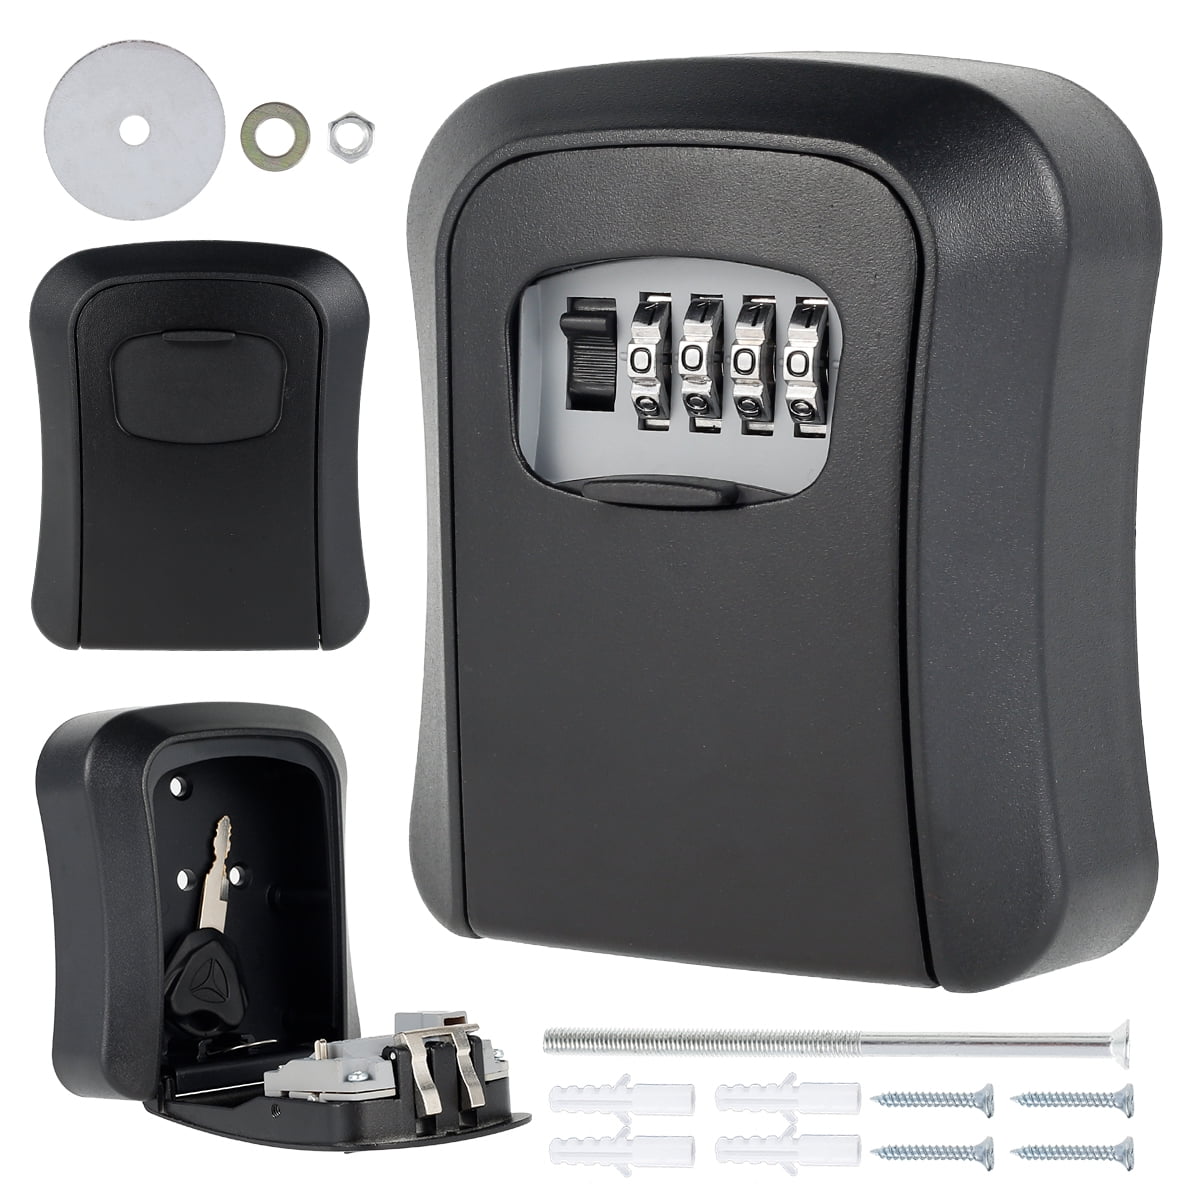 4 Digit Wall Mounted Key Safe Key Box Secure Lock Combination Safety Key Outdoor 